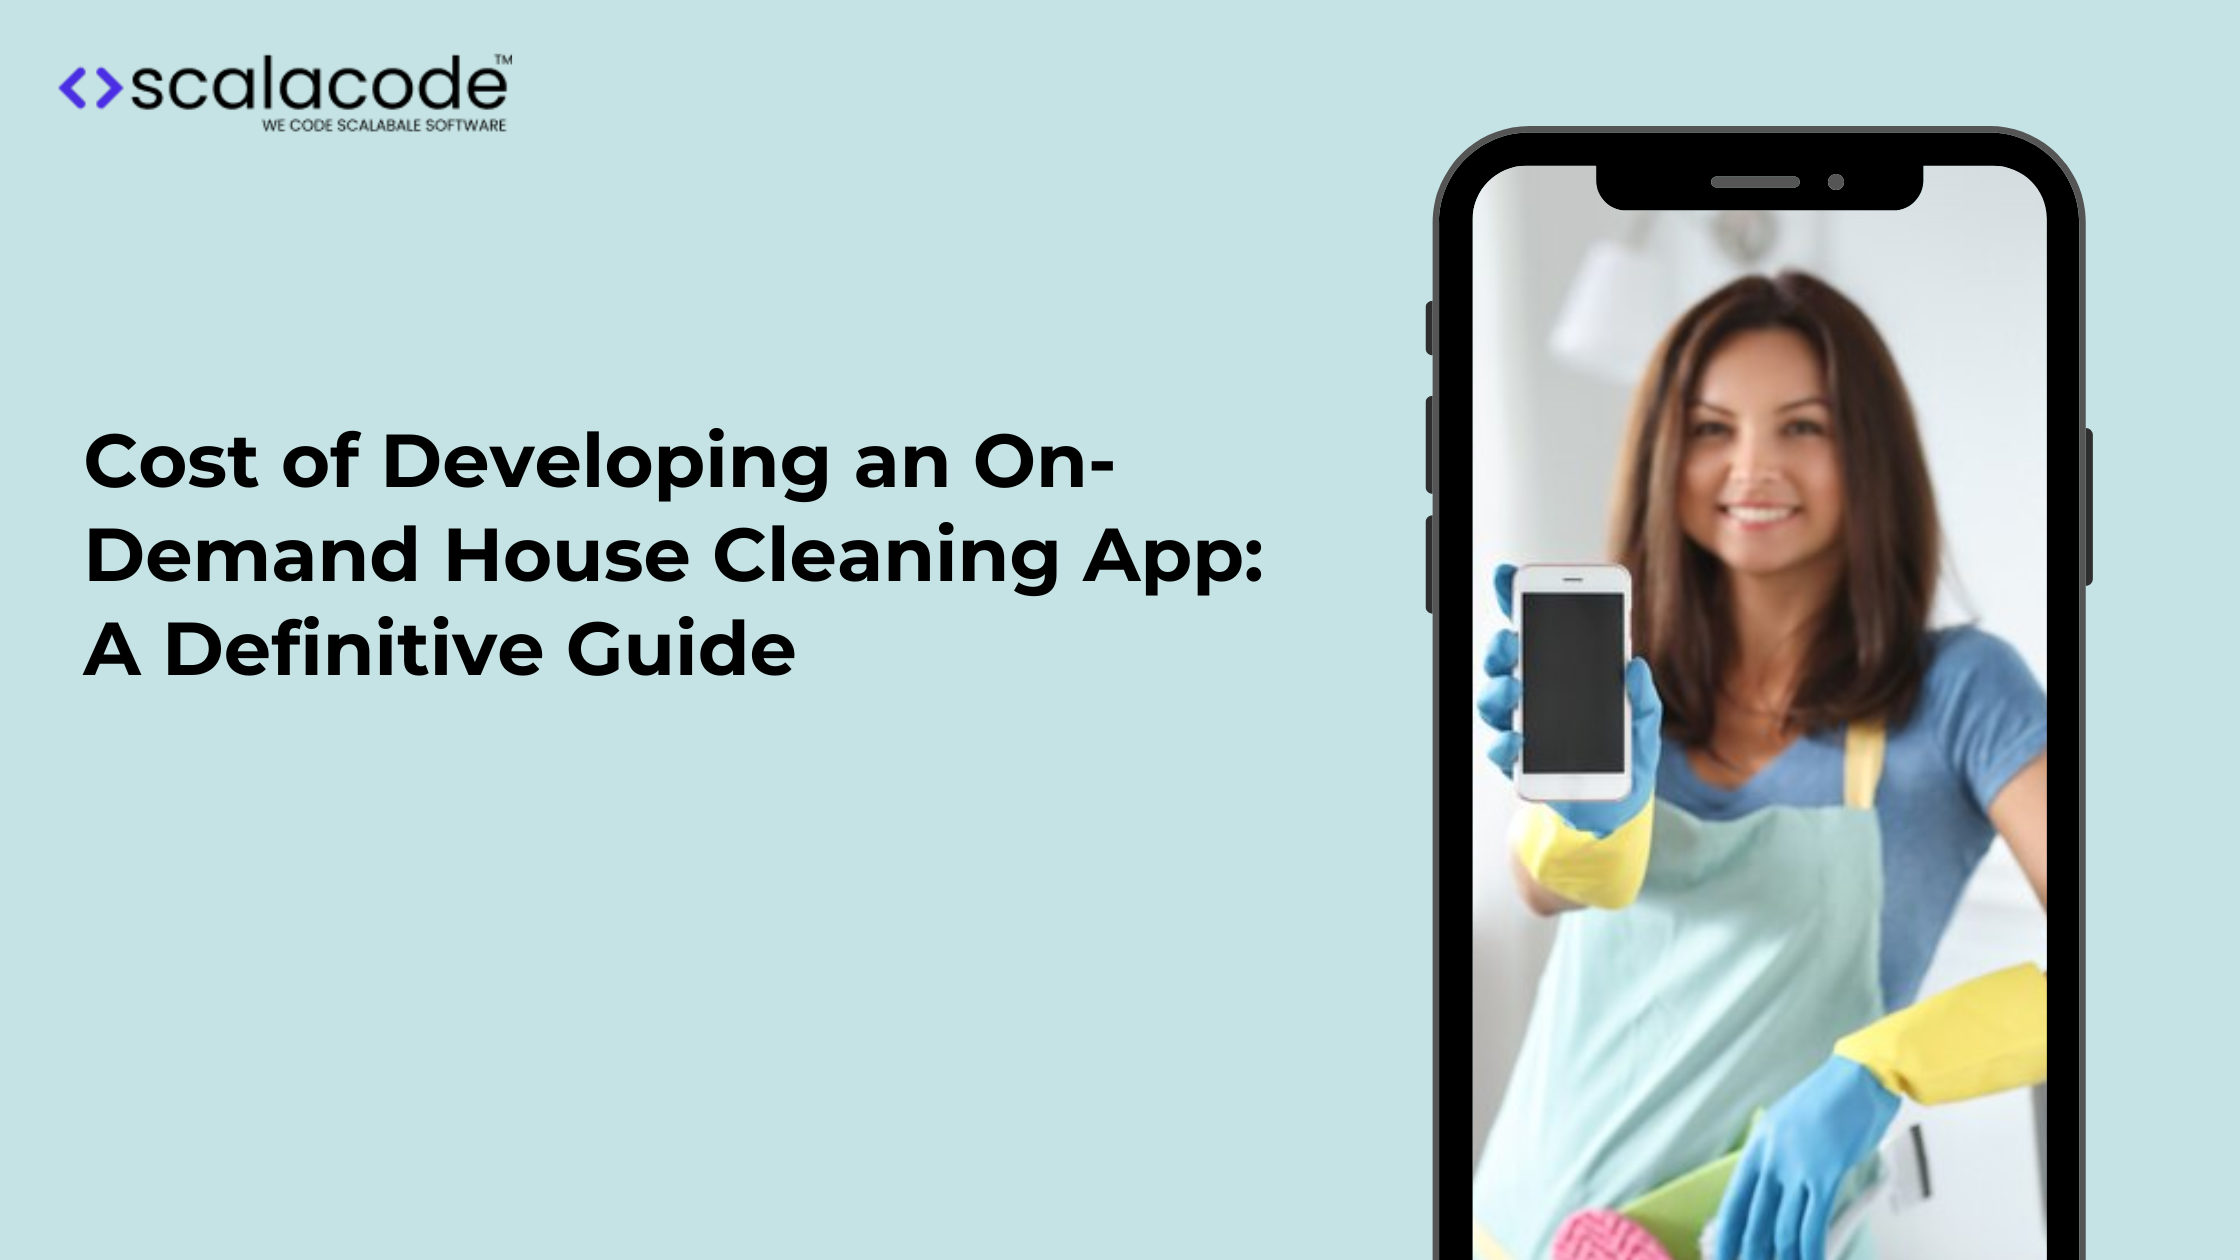 Cost of Developing an On-Demand House Cleaning App